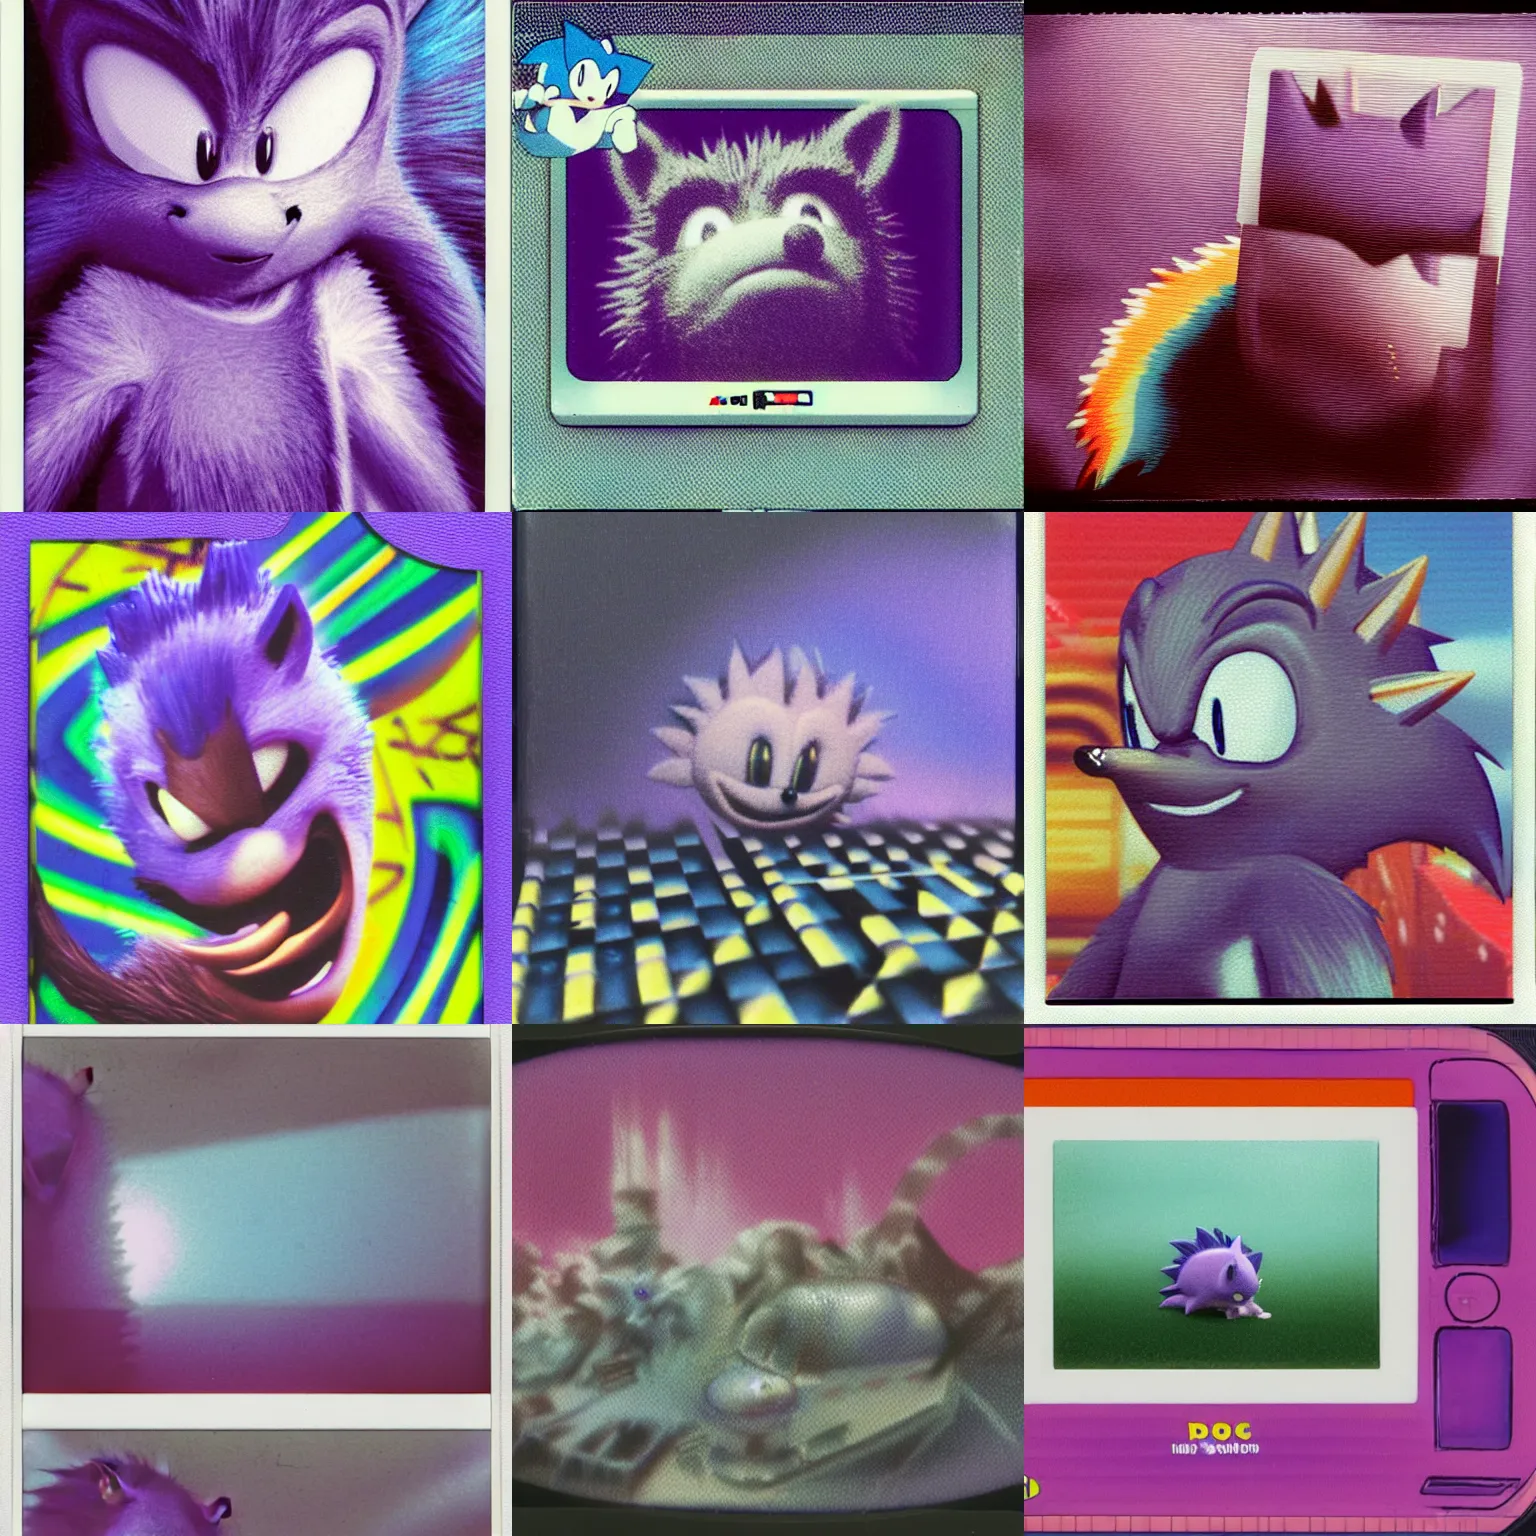 Prompt: close up polaroid instax portrait of sonic hedgehog, matte painting landscape of a surreal sharp foggy detailed professional soft pastels high quality airbrush art album cover of a liquid dissolving airbrush art lsd dmt sonic the hedgehog swimming through cyberspace purple checkerboard background 1 9 9 0 s 1 9 9 2 sega genesis rareware video game album cover